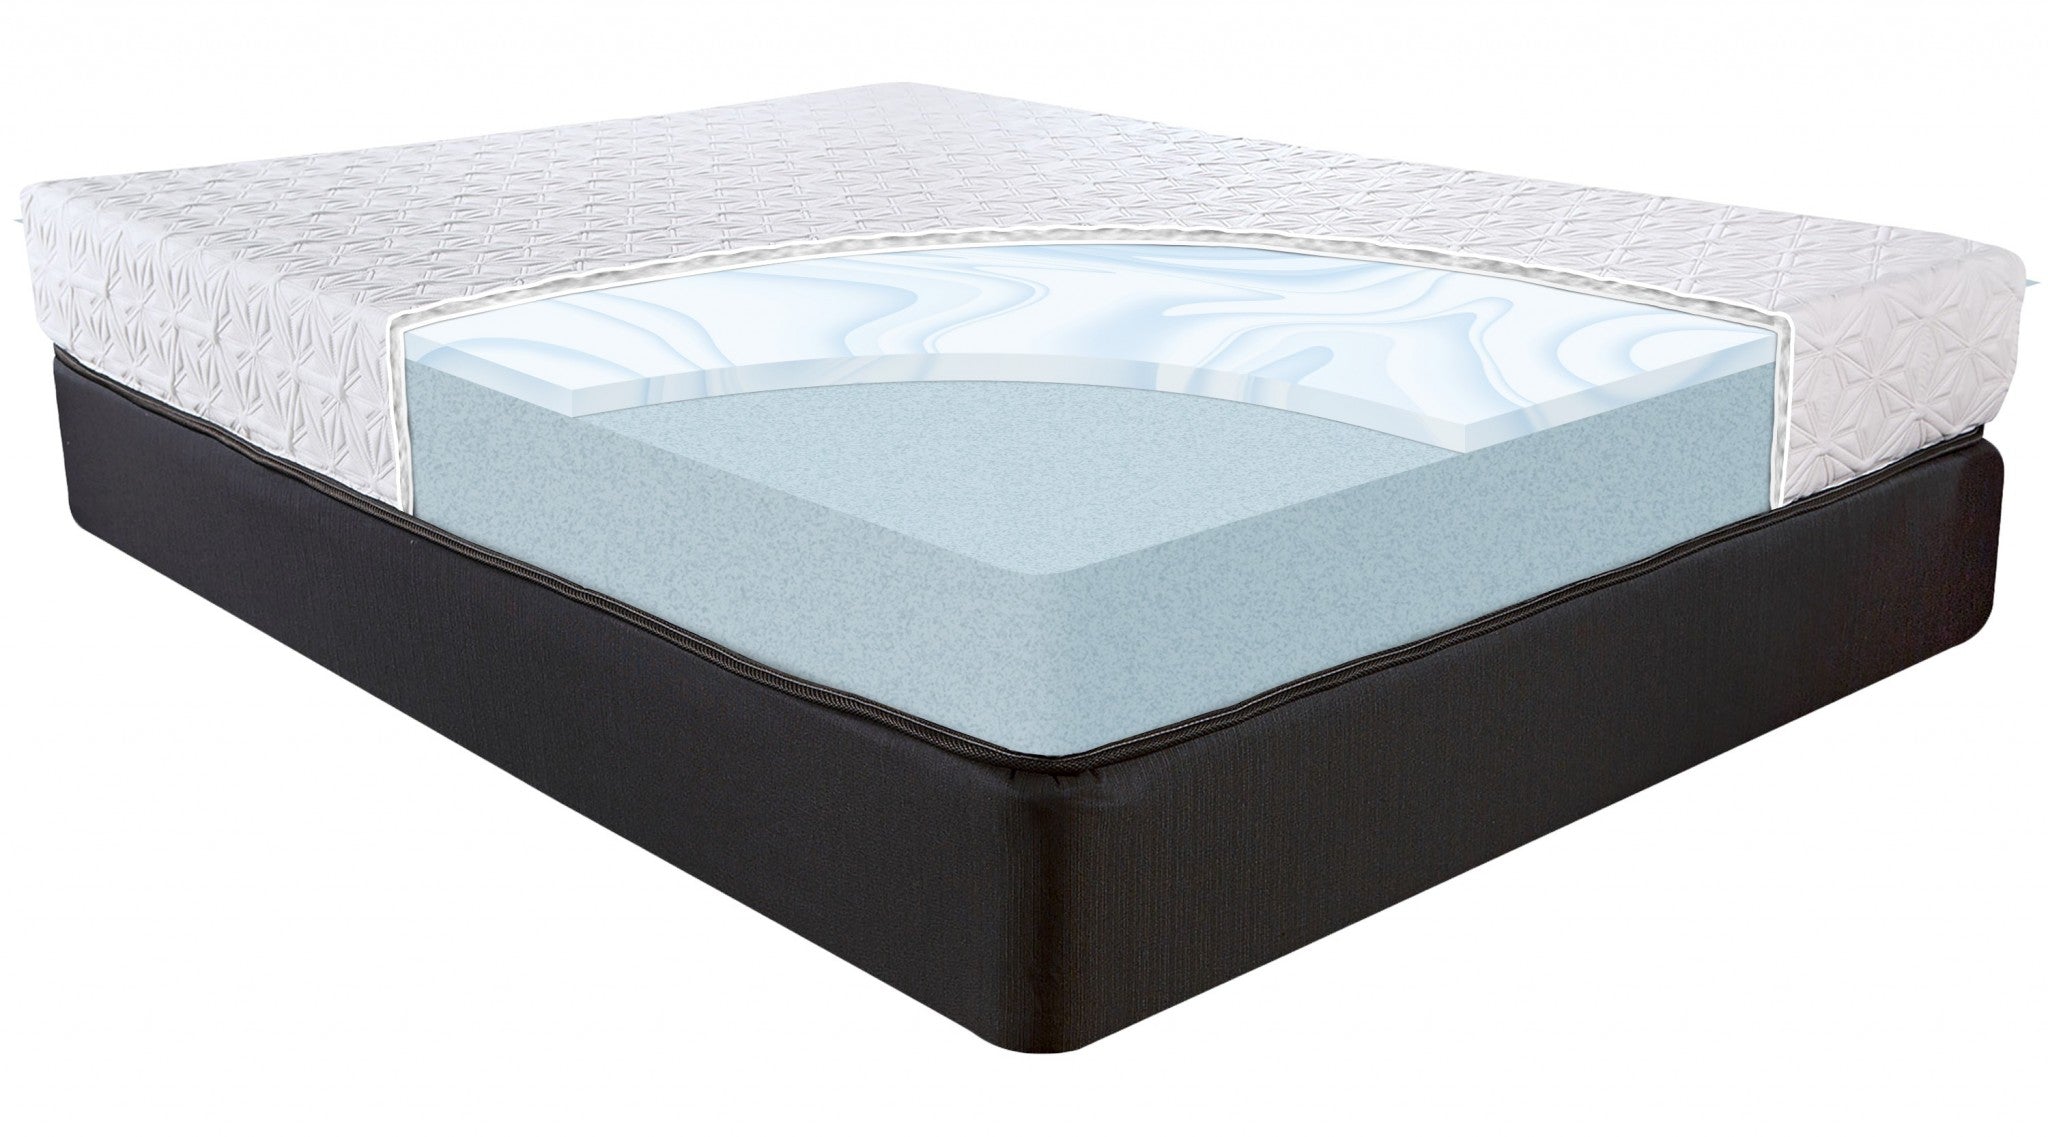 8 Inch Luxury Plush Gel Infused Memory Foam and HD Support Foam Smooth Top Mattress